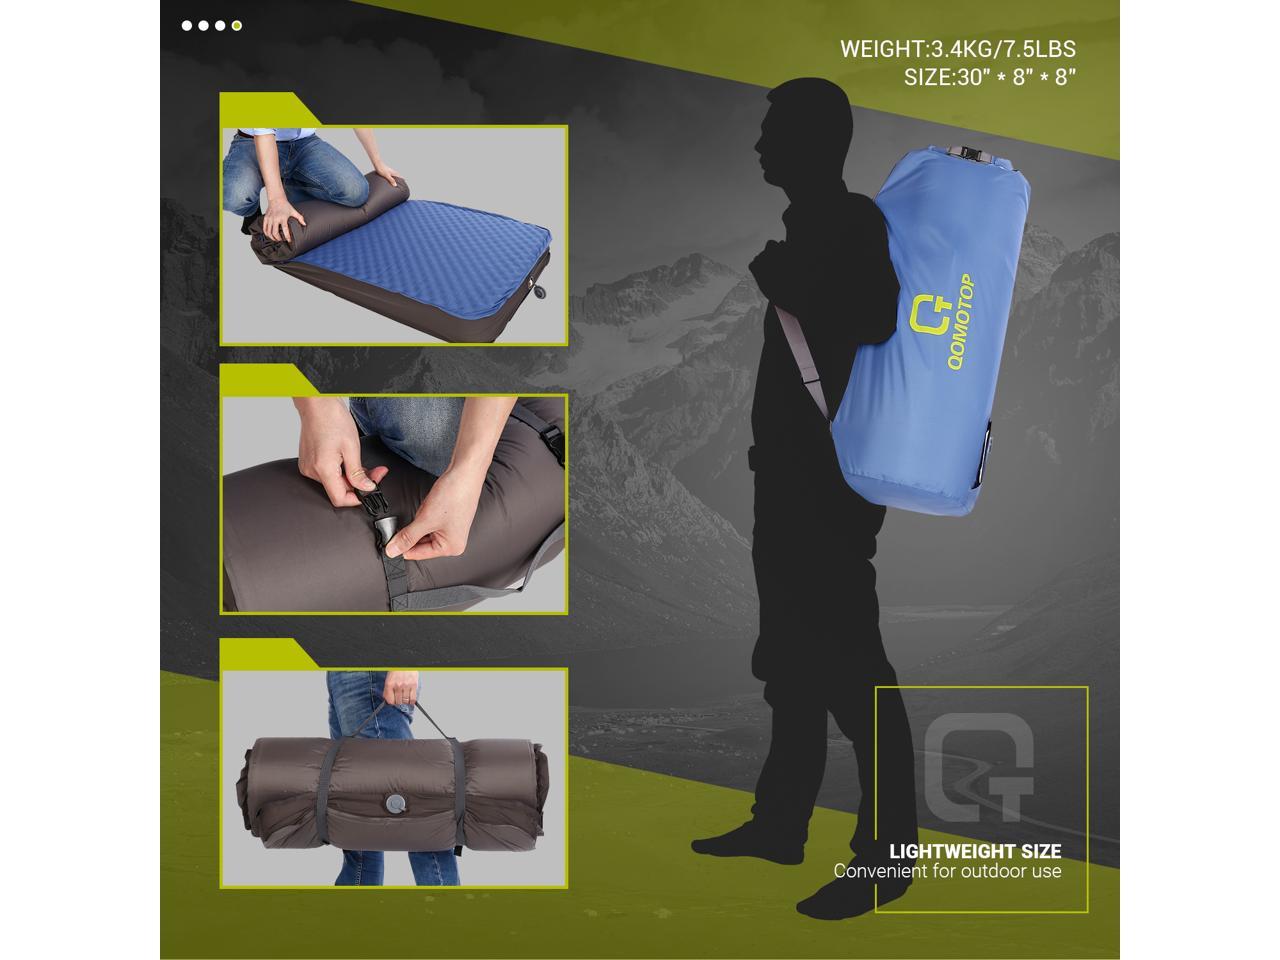 Portable Roll-Up Sleeping Pad and Floor Guest Bed /52 Single 7.5 lbs/Double 13.6 lbs Delivered within 4-5 working days Single 4 Inches Thick PU Foam QOMOTOP Single/Double Self-Inflating Camping Mattress Double 80 × 28